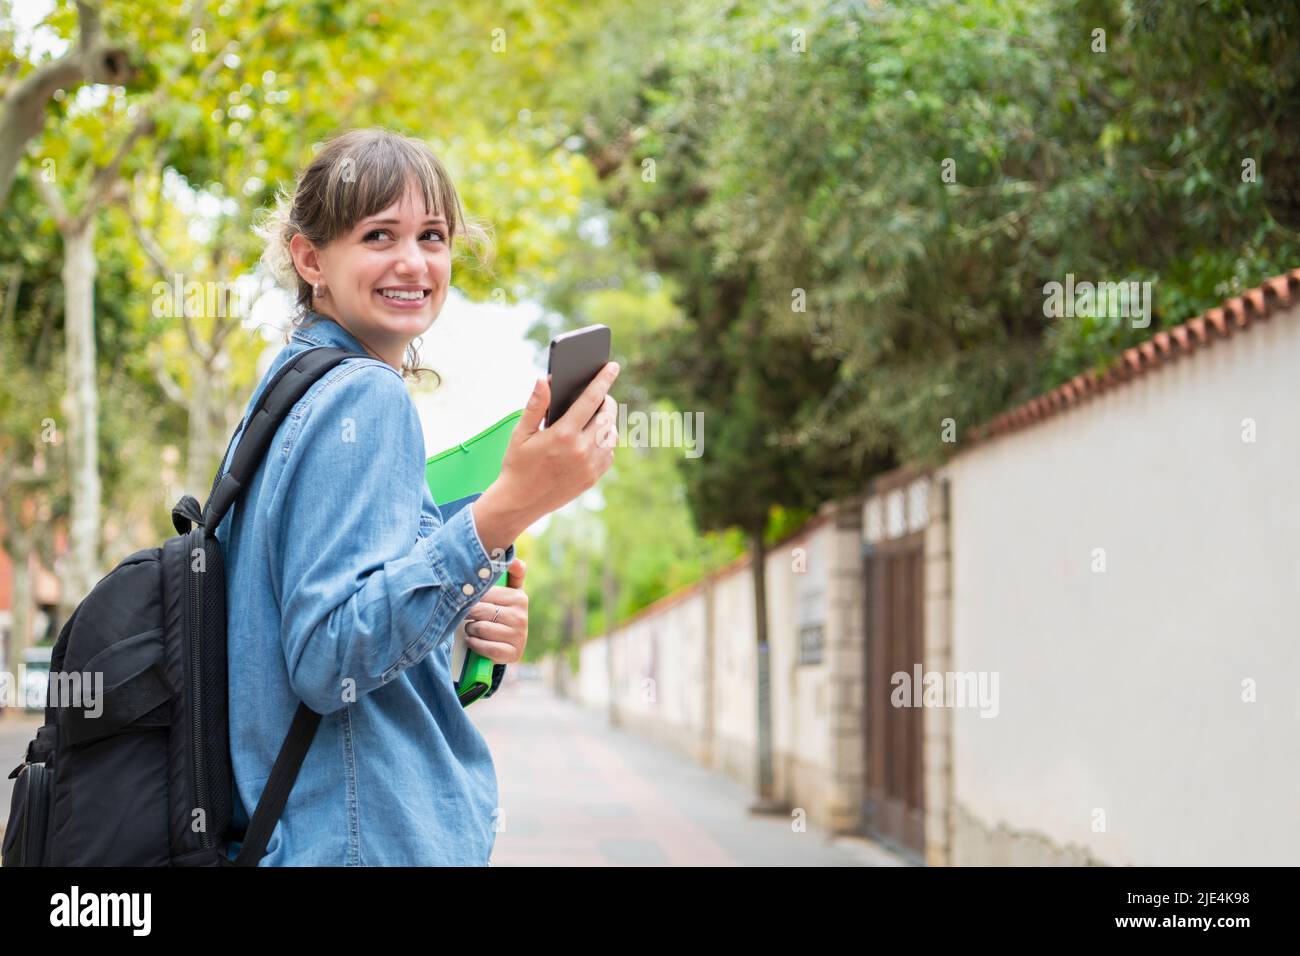 Young female student holding a phone looking back Stock Photo